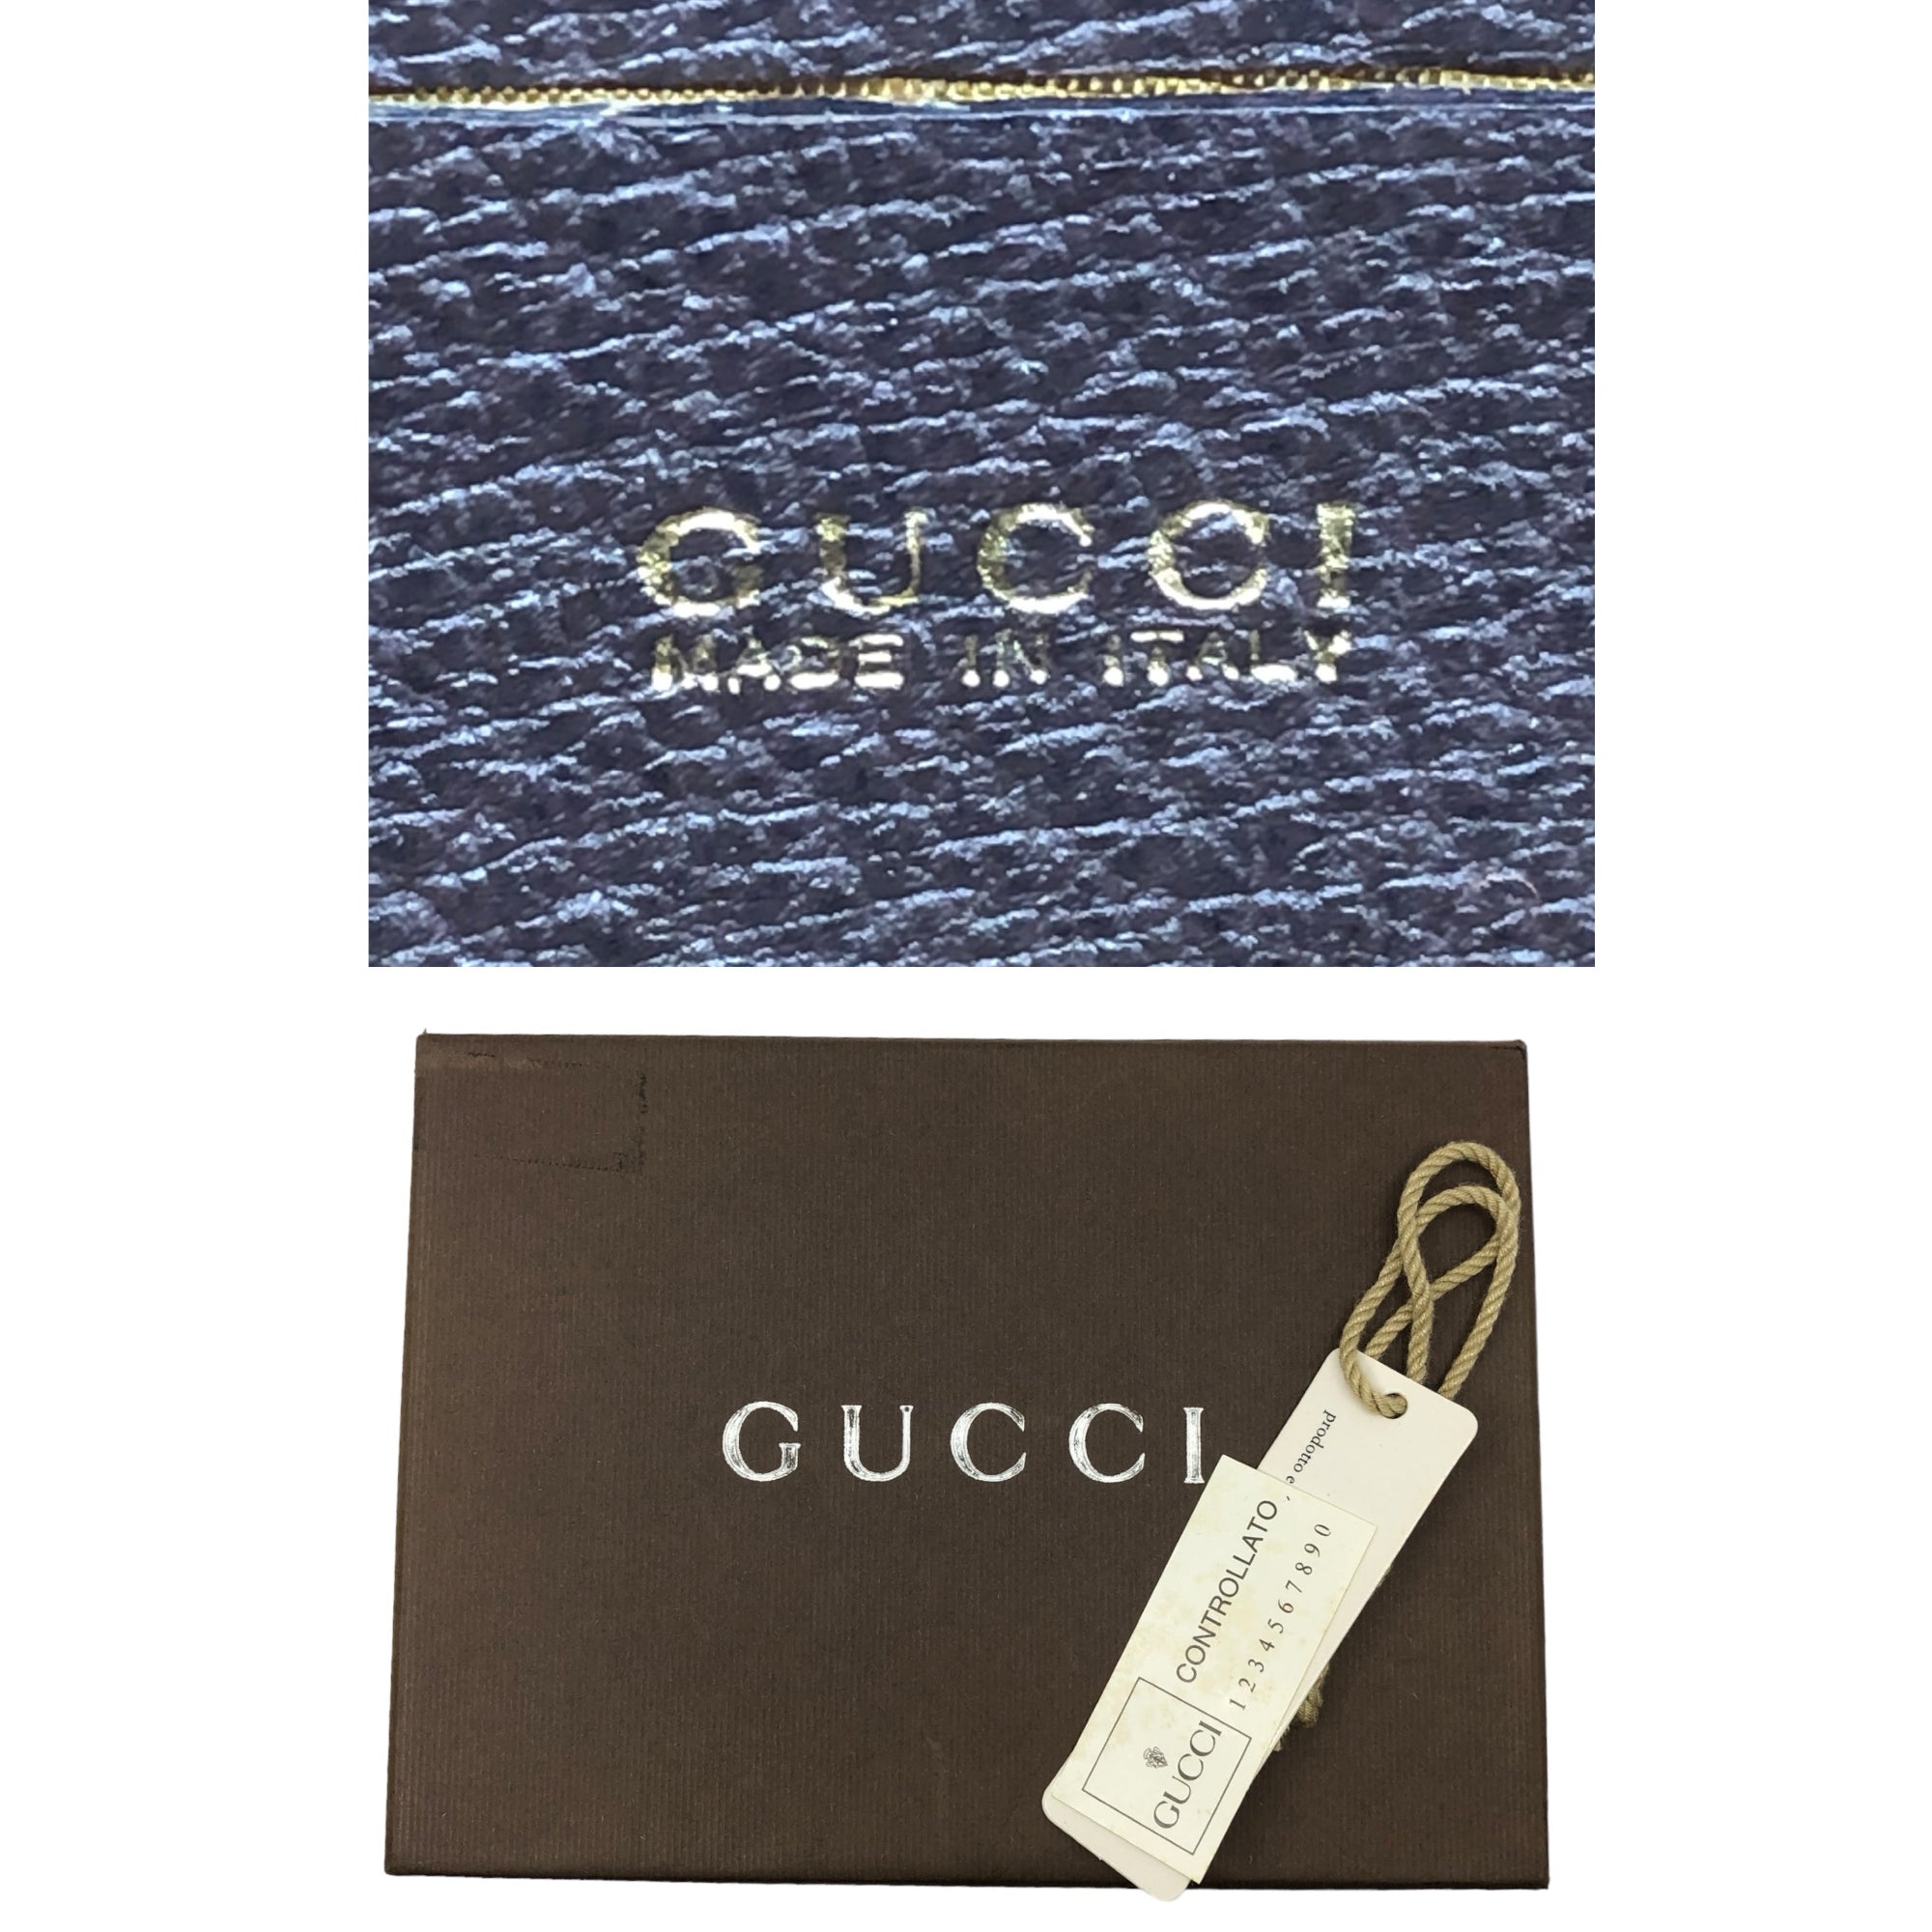 GUCCI(グッチ) OLD GUCCI 2WAY mini suede  bamboo shoulder bag ミニ スウェード バンブー ショルダー バッグ 913021-620306 ブラウン 箱付き